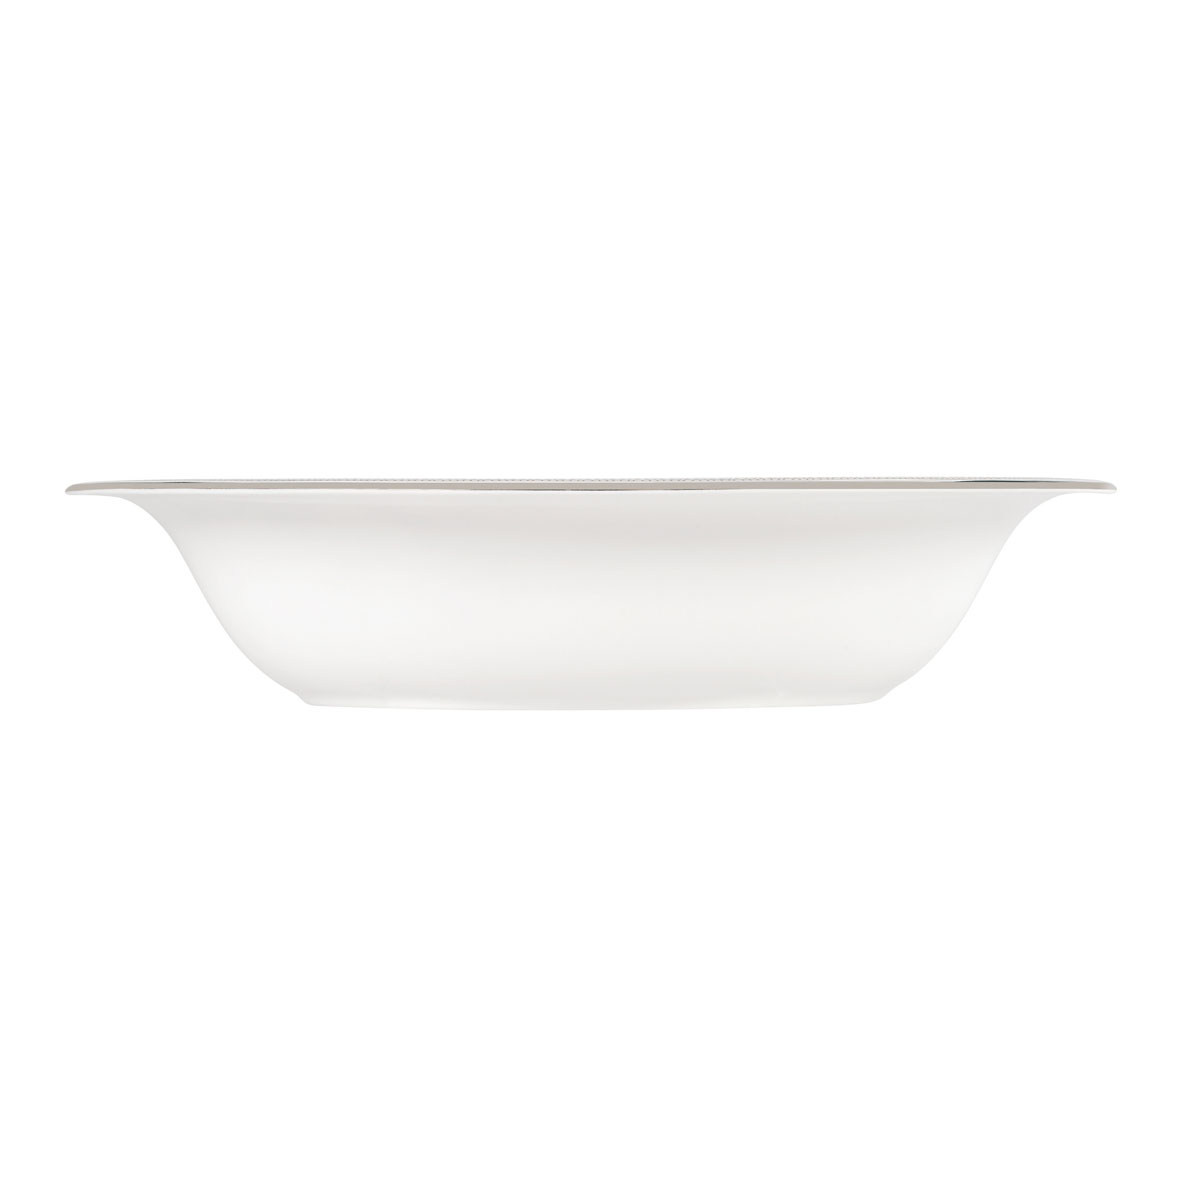 Vera Wang Wedgwood Vera Lace Open Vegetable Oval Bowl